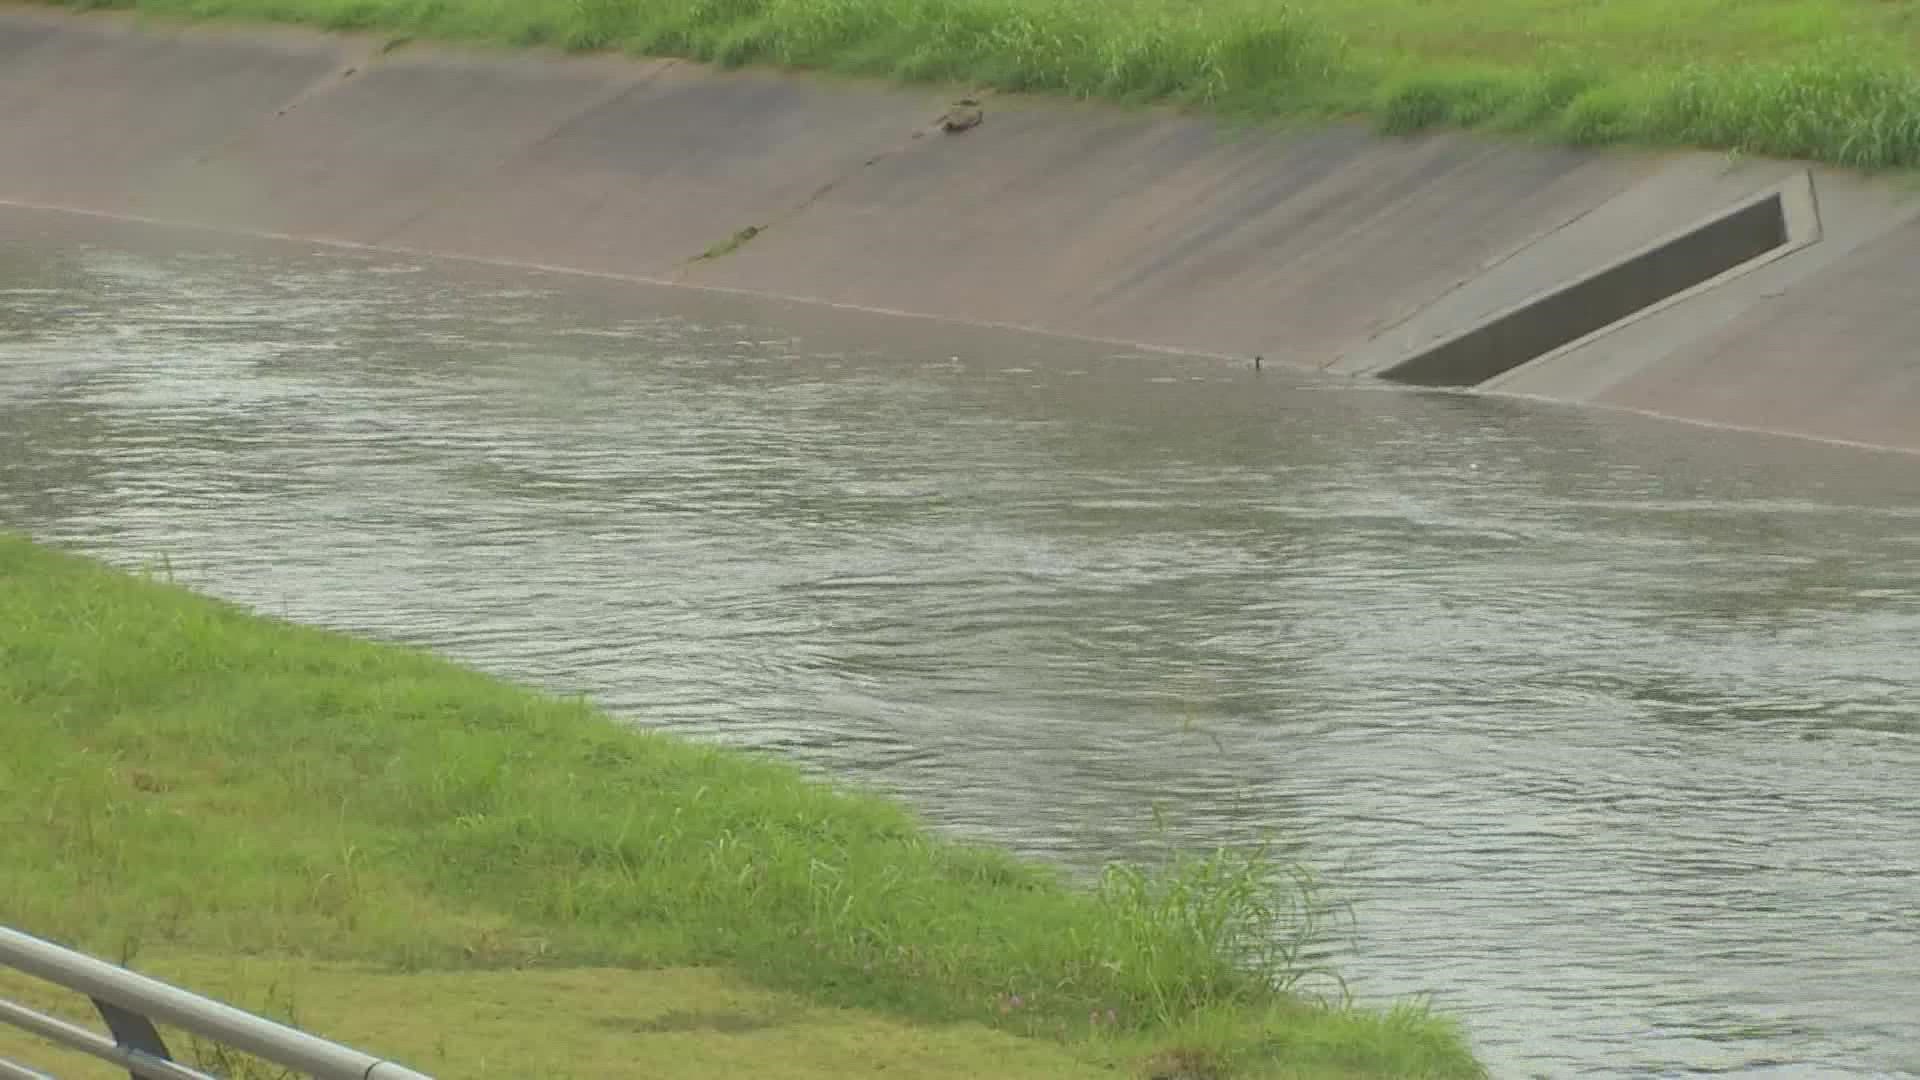 Water levels in Houston-area bayous is always a concern when a storm is approaching.